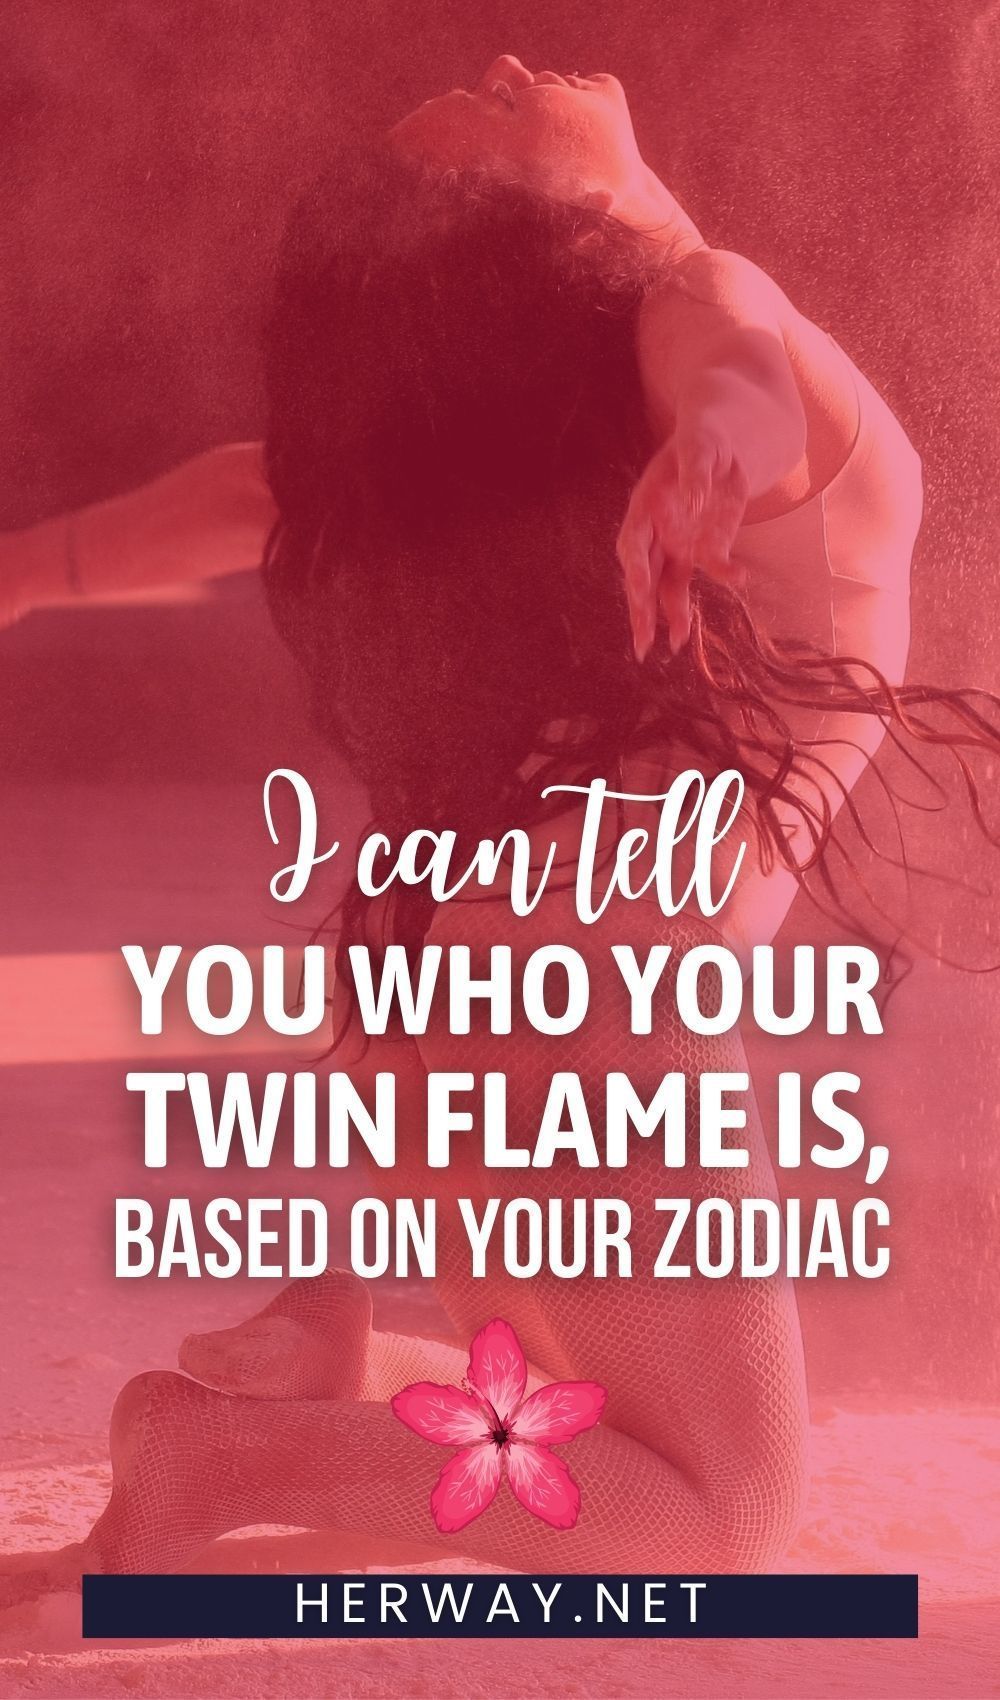 This Is What Your Twin Flame Looks Like, Based On Your Zodiac Sign